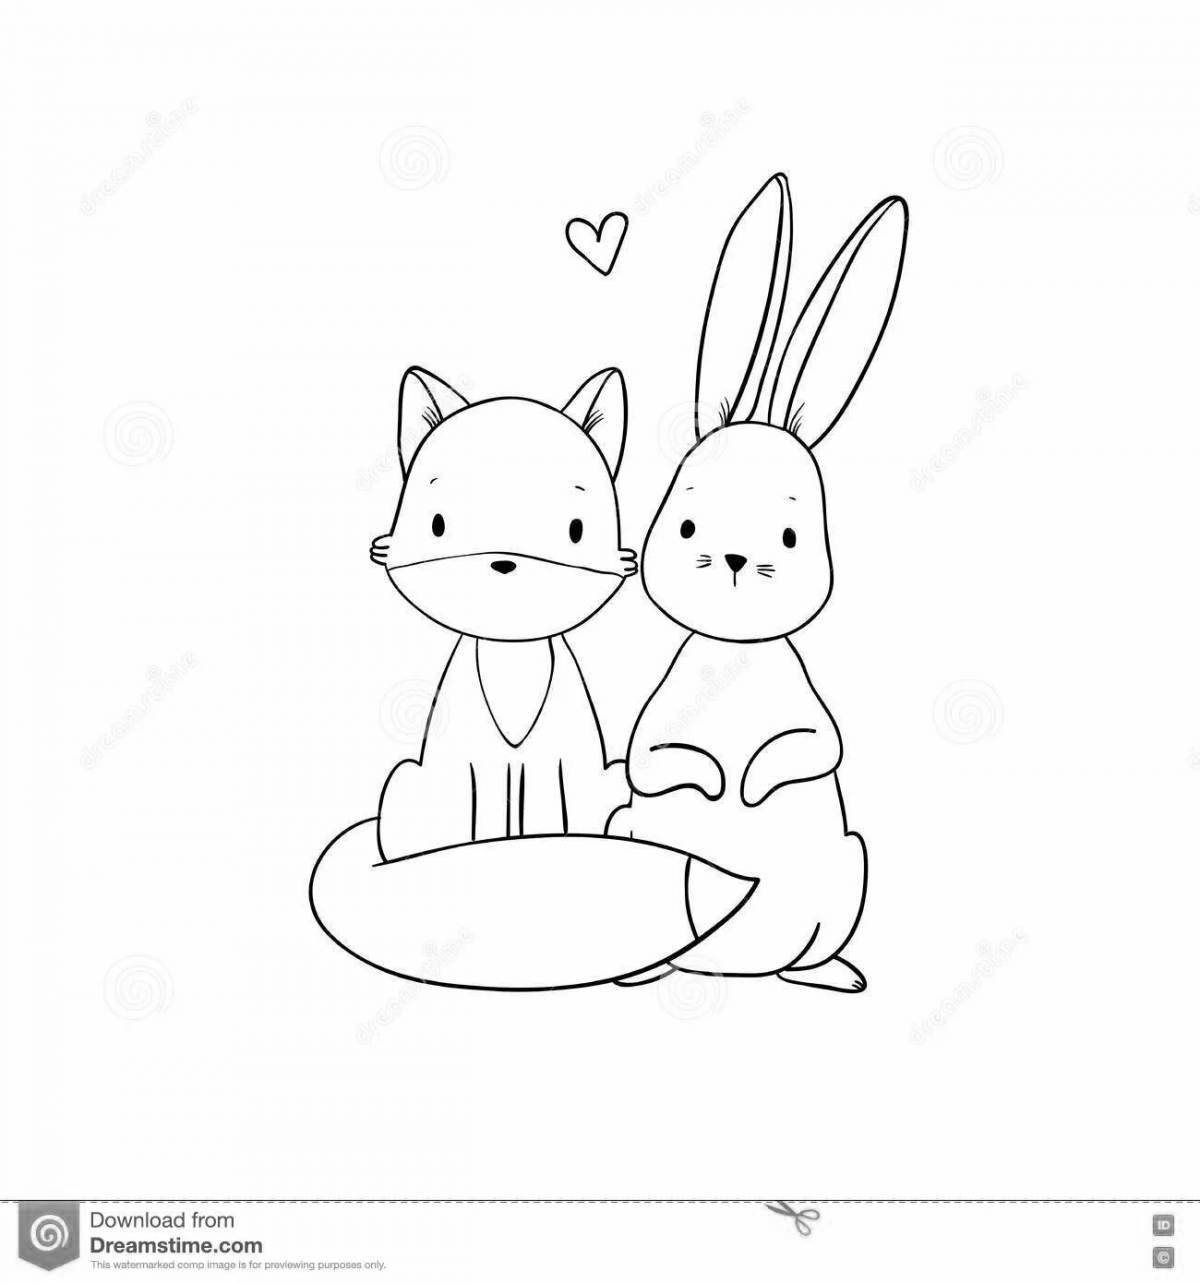 Funny rabbit and cat coloring book